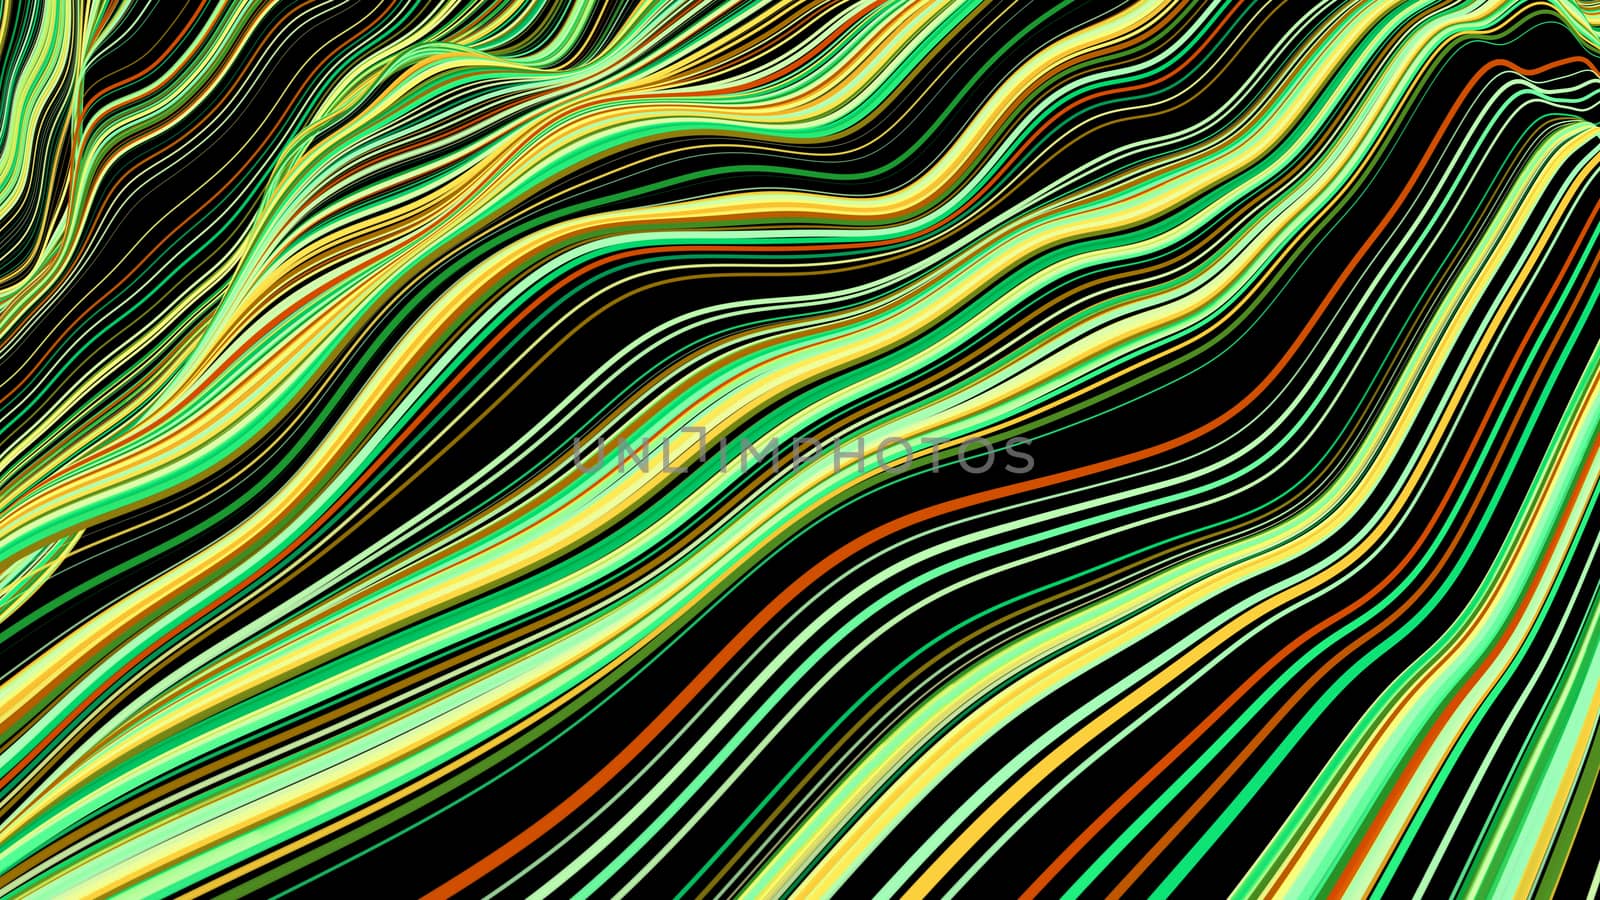 Abstract background with colorful wavy lines. 3d rendered